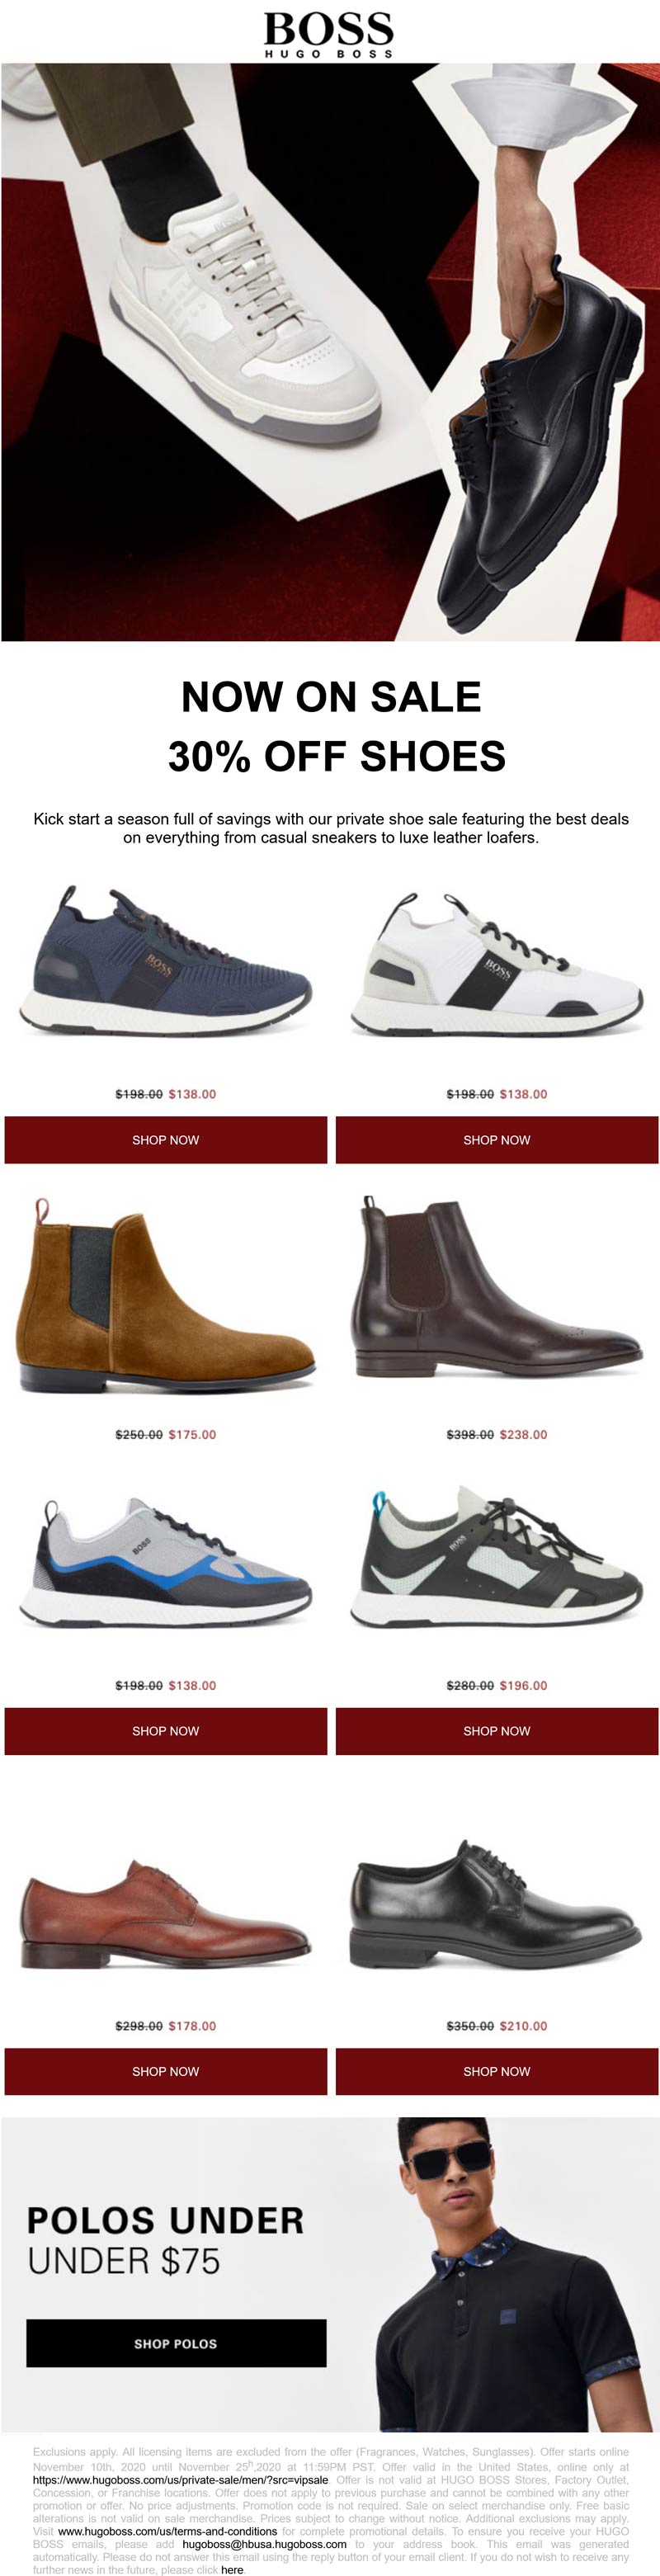 BOSS stores Coupon  30% off shoes online at HUGO BOSS #boss 